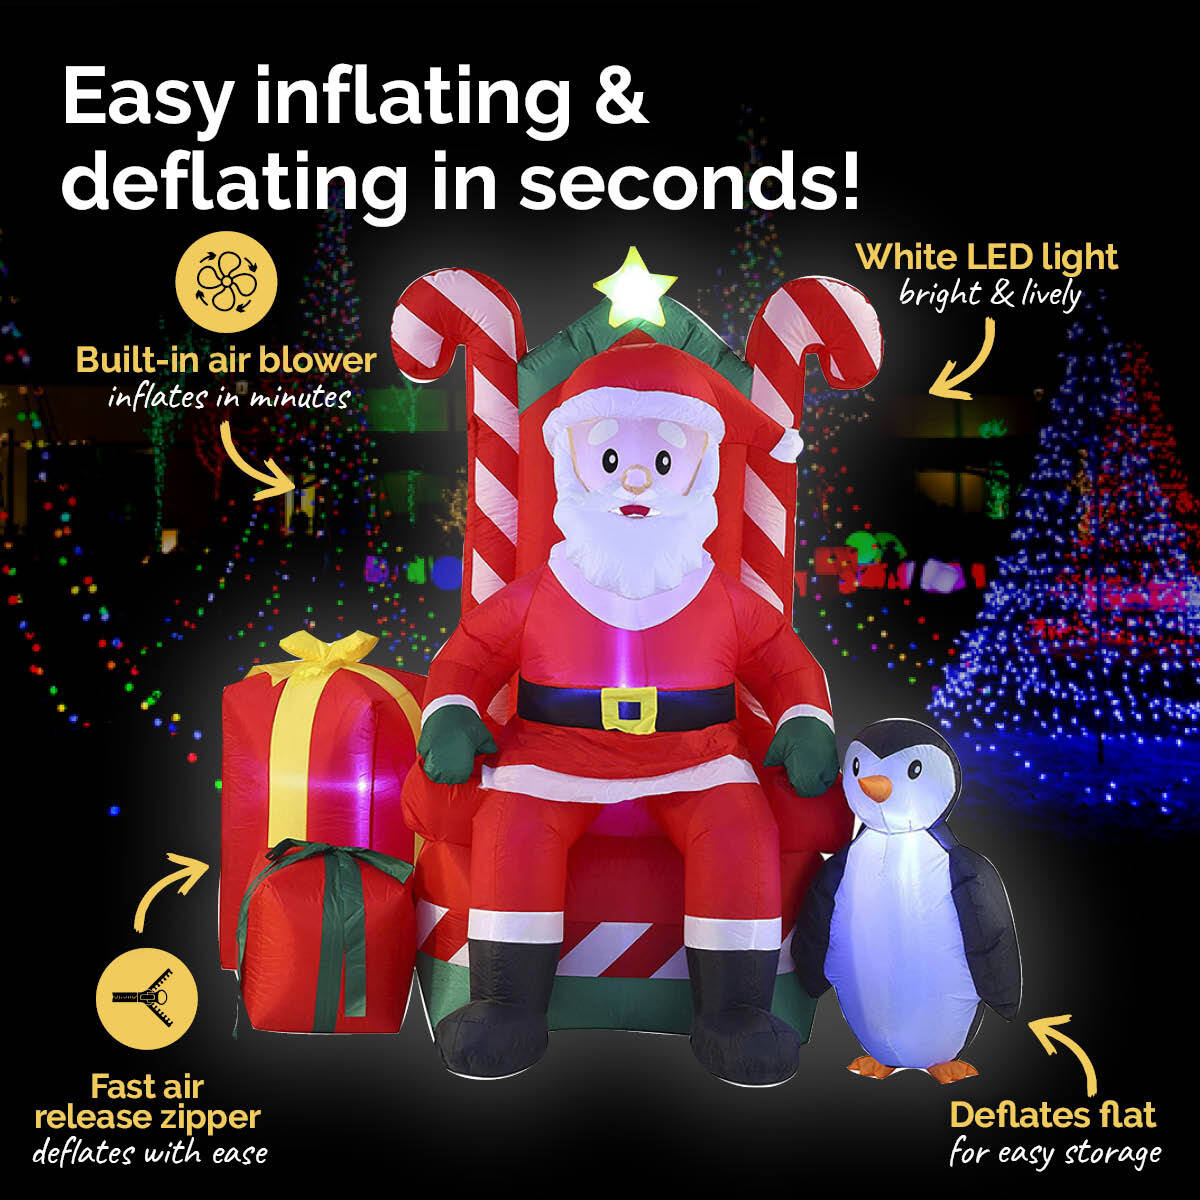 Christmas By Sas 2.1m Santa In His Armchair Self Inflating LED Lighting - Little Kids Business